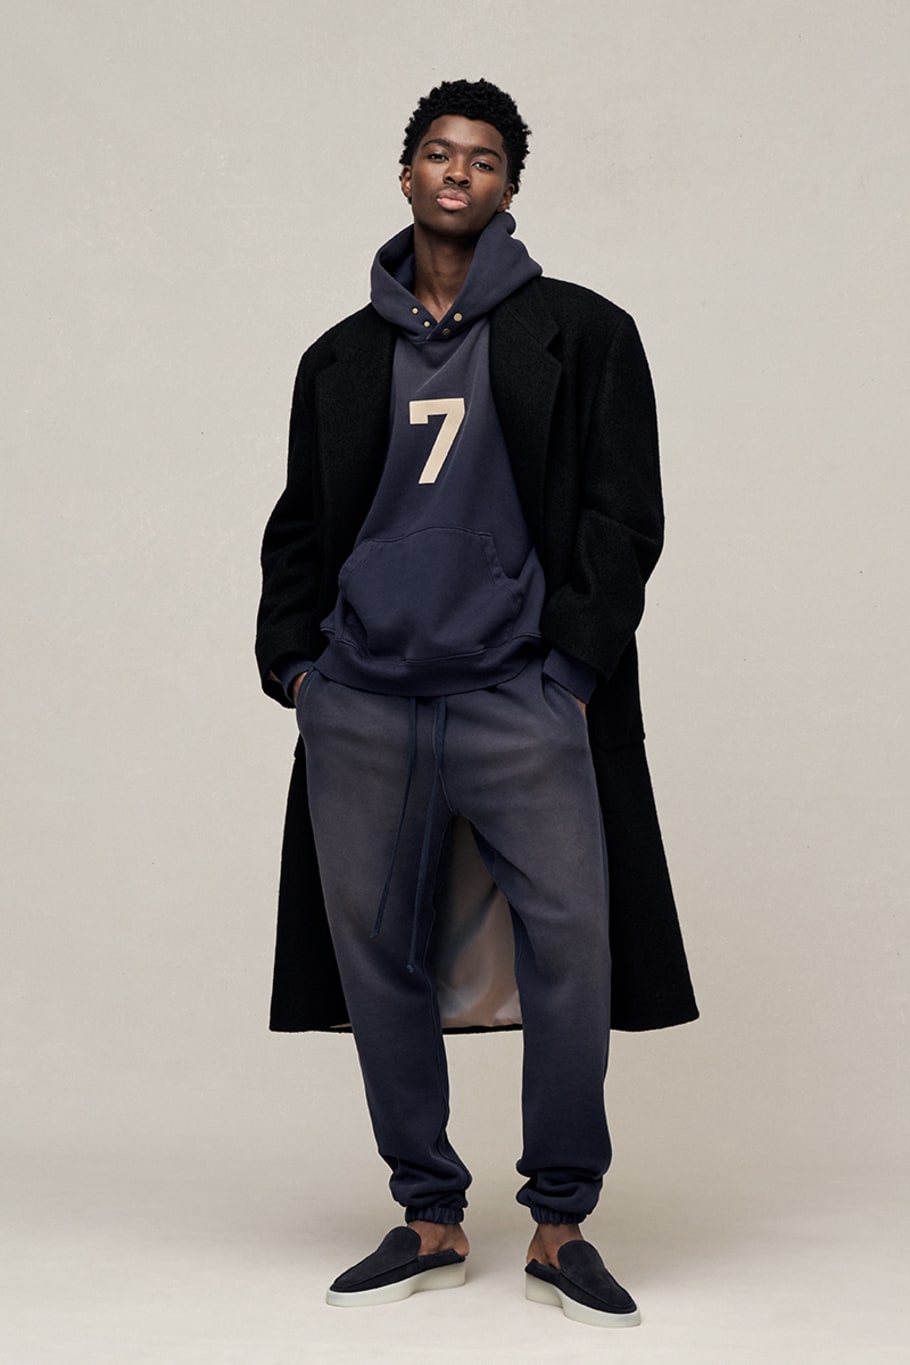 62cmfear of god 7th seventh　パーカー